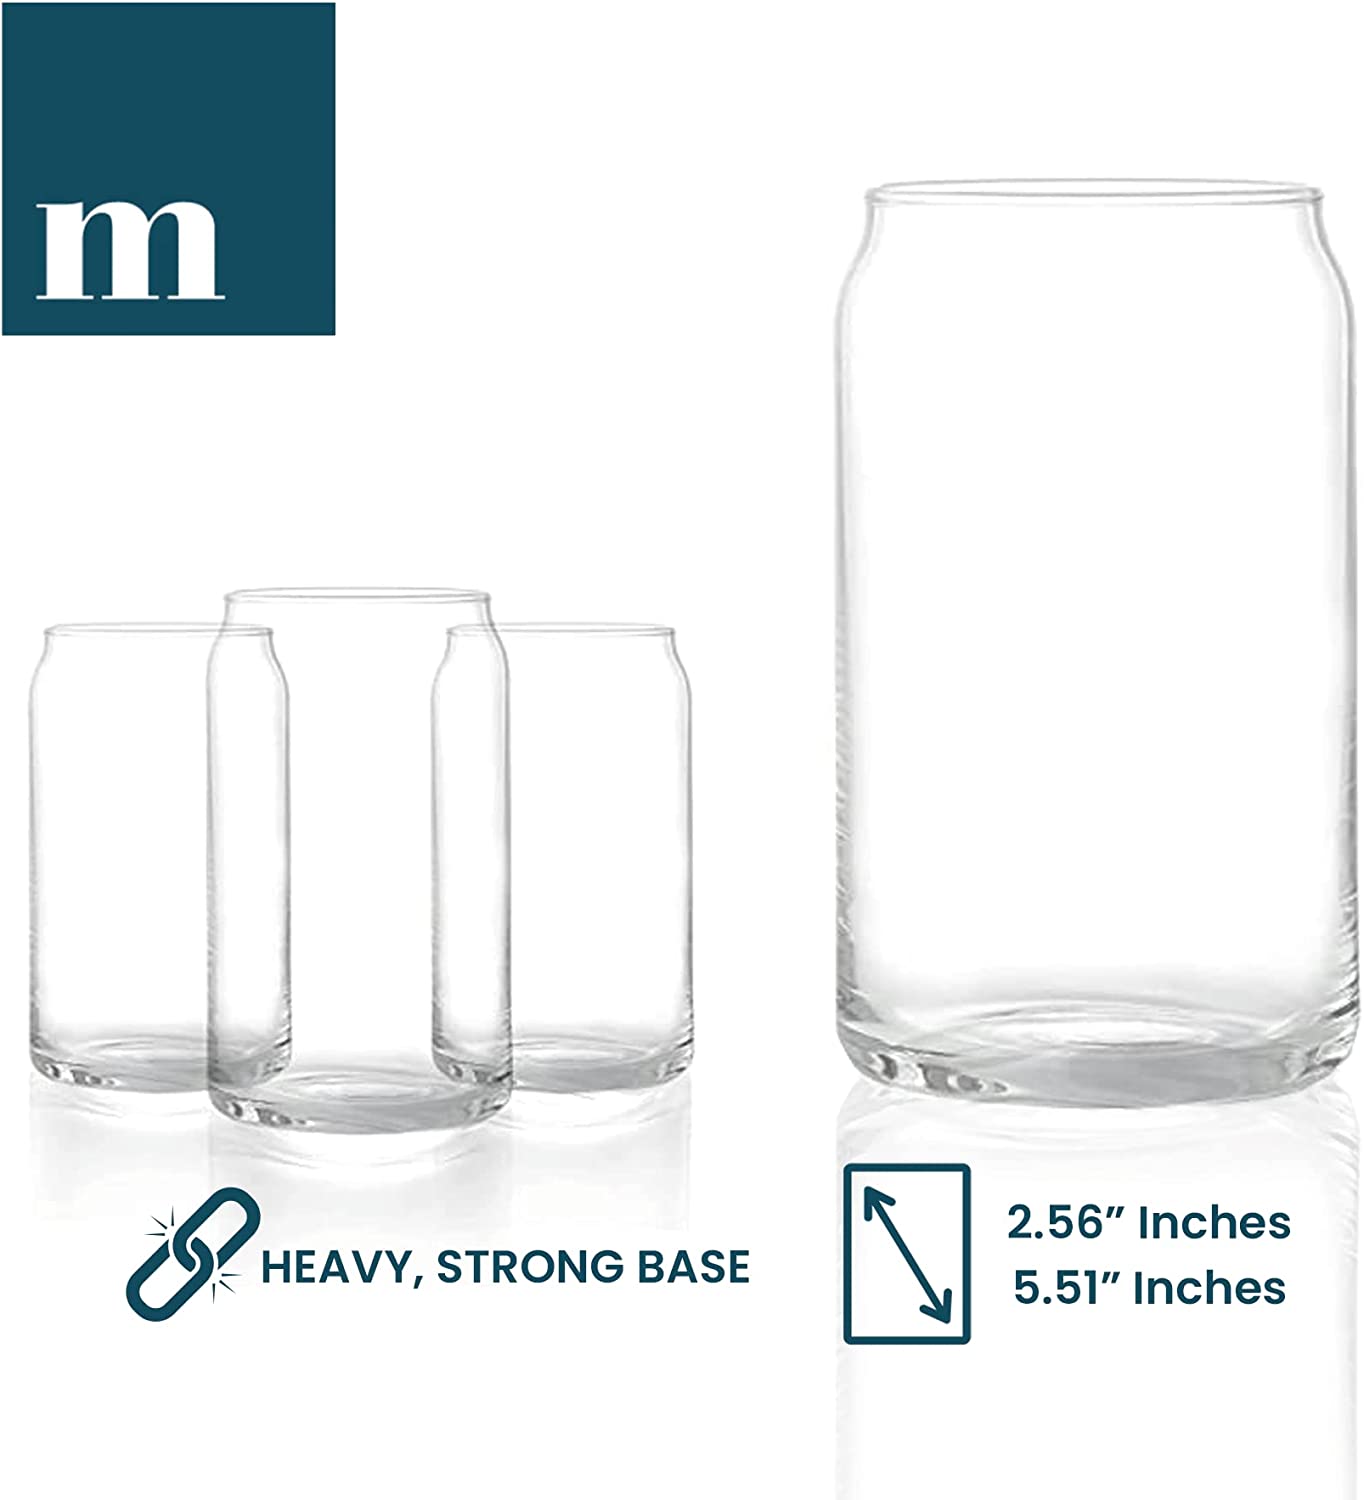 Creative Can Shaped Beer Glasses Craft Drinking Glasses Cocktail